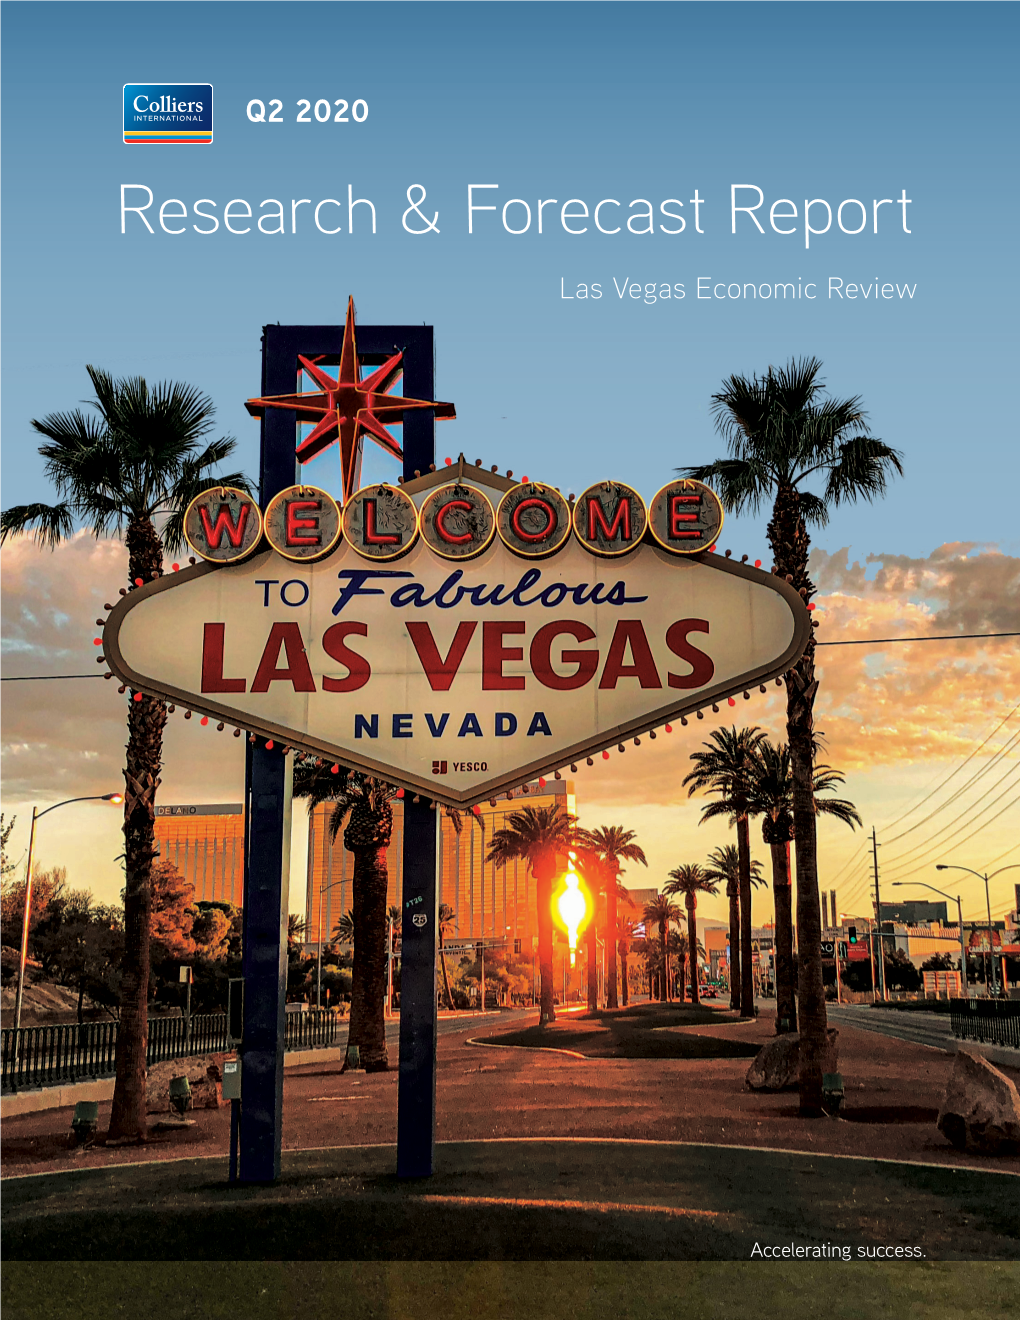 Research & Forecast Report